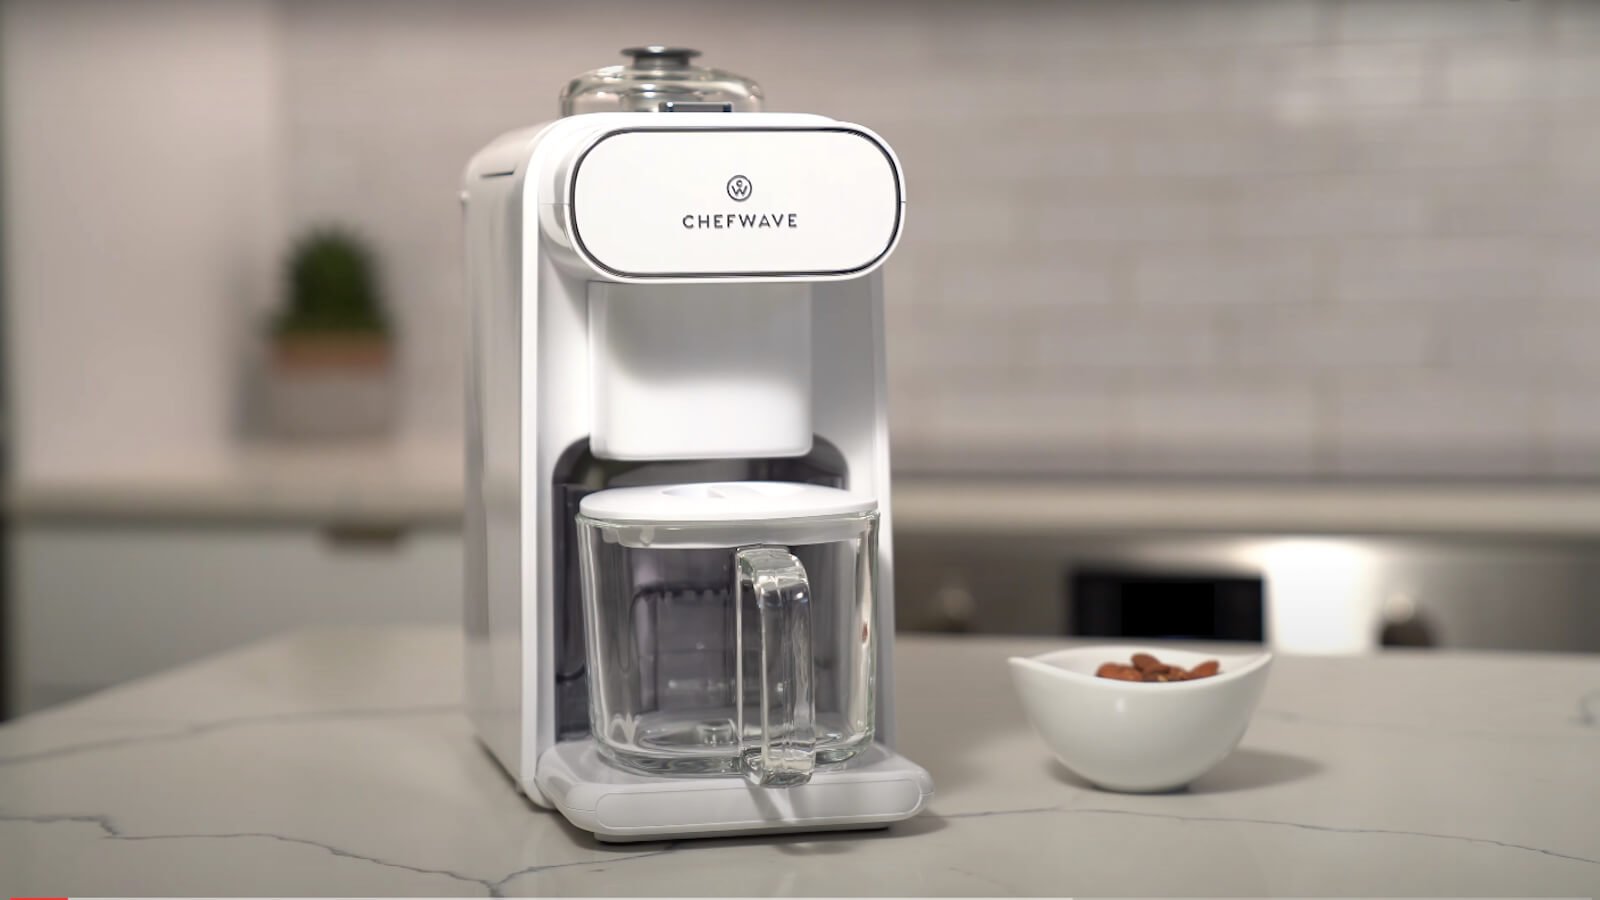 ChefWave Milkmade nondairy milk maker takes only 15 minutes